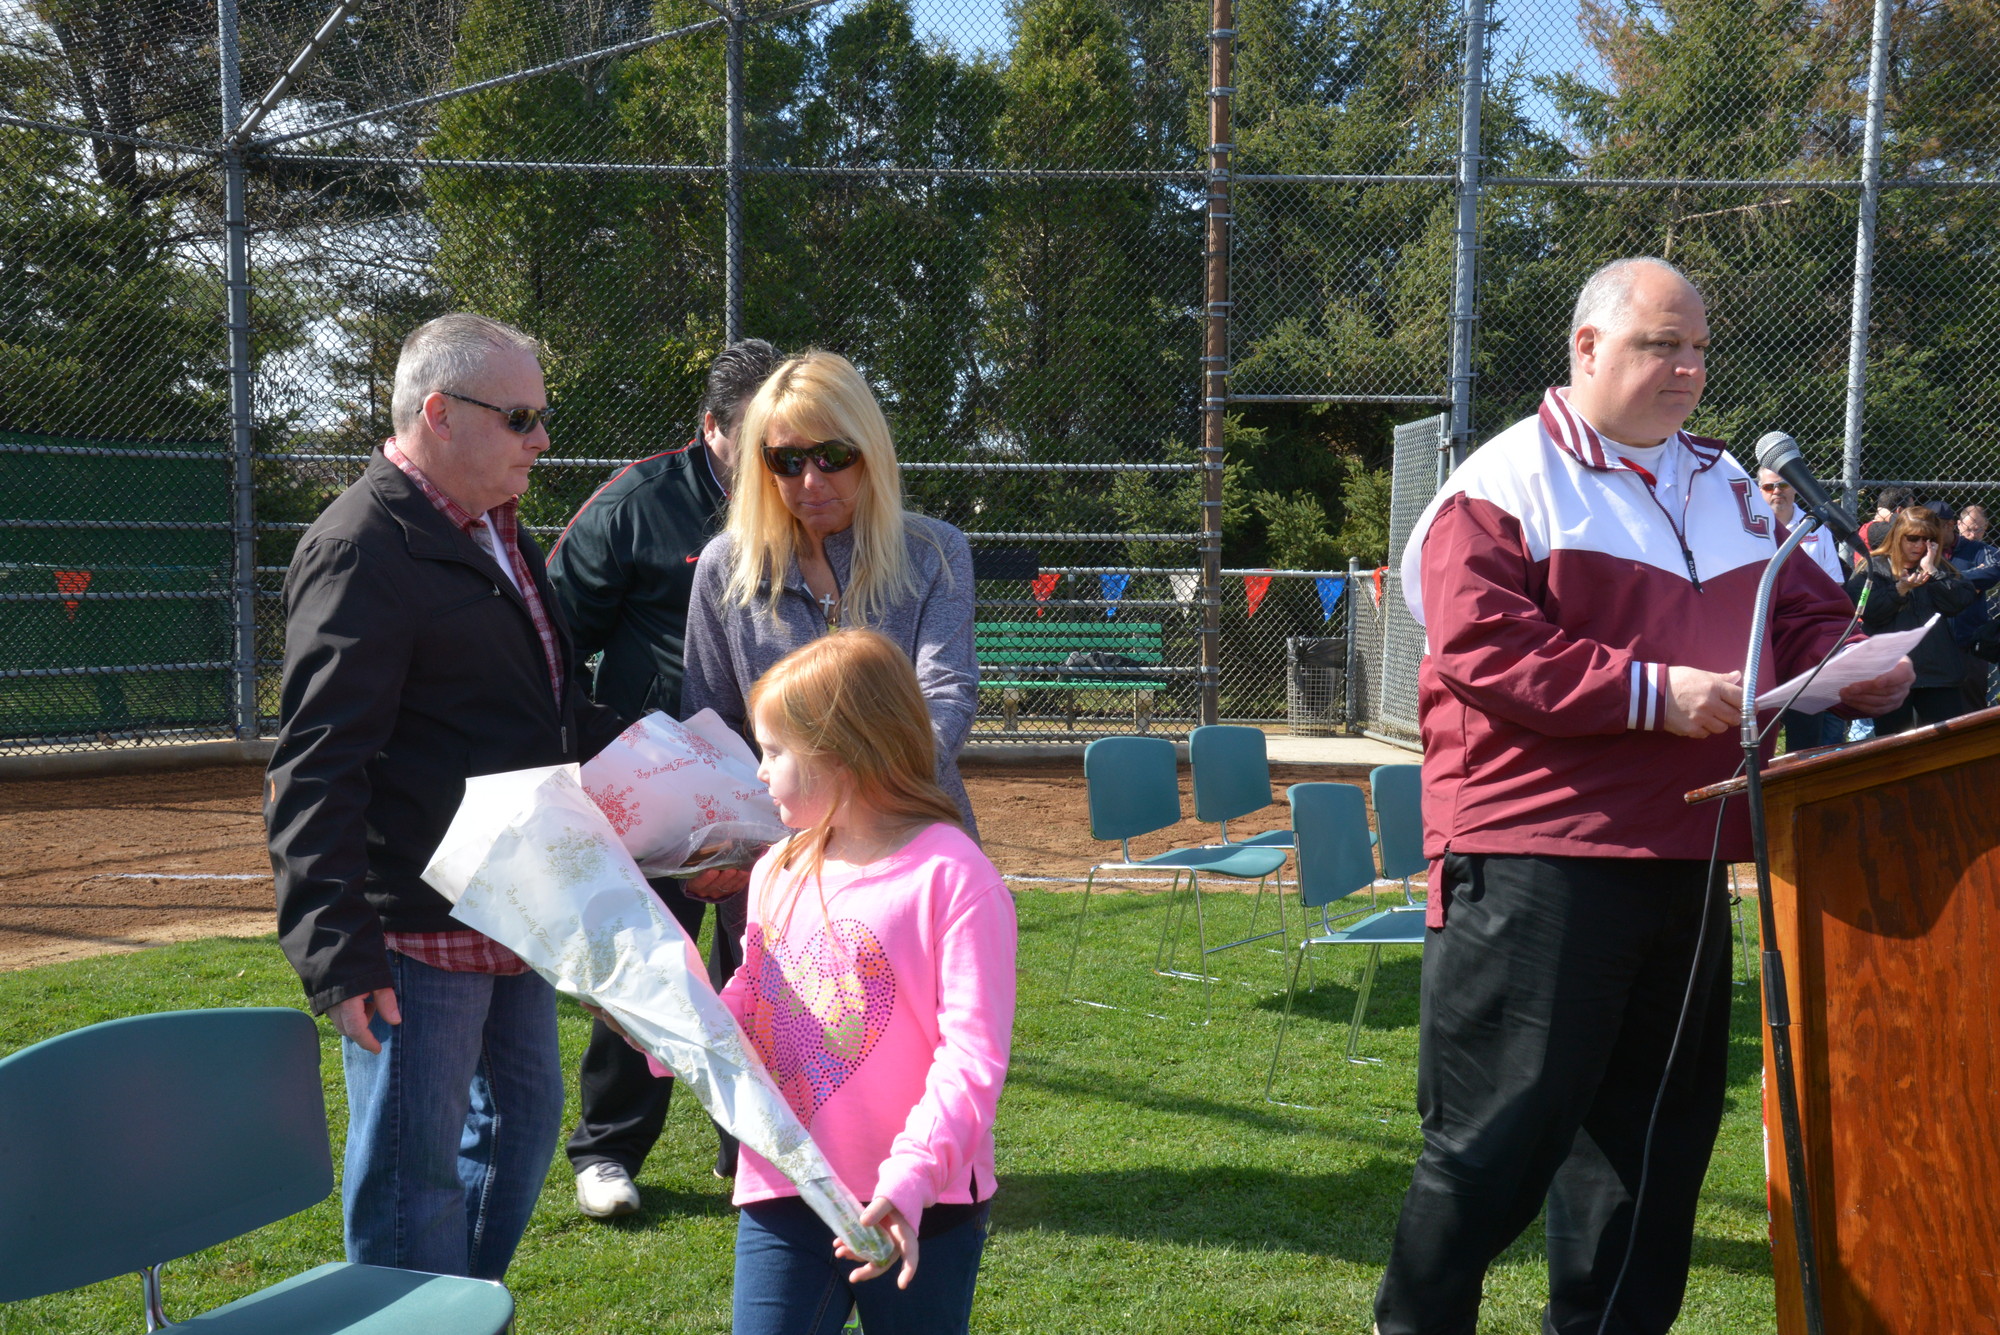 The family of Harlie Treanor, father Kevin, mother Joy Ambrosio and sister Maddie, with league president Joe Aloi during the Central Nassau Little League Parade, which was dedicated to Harlie.